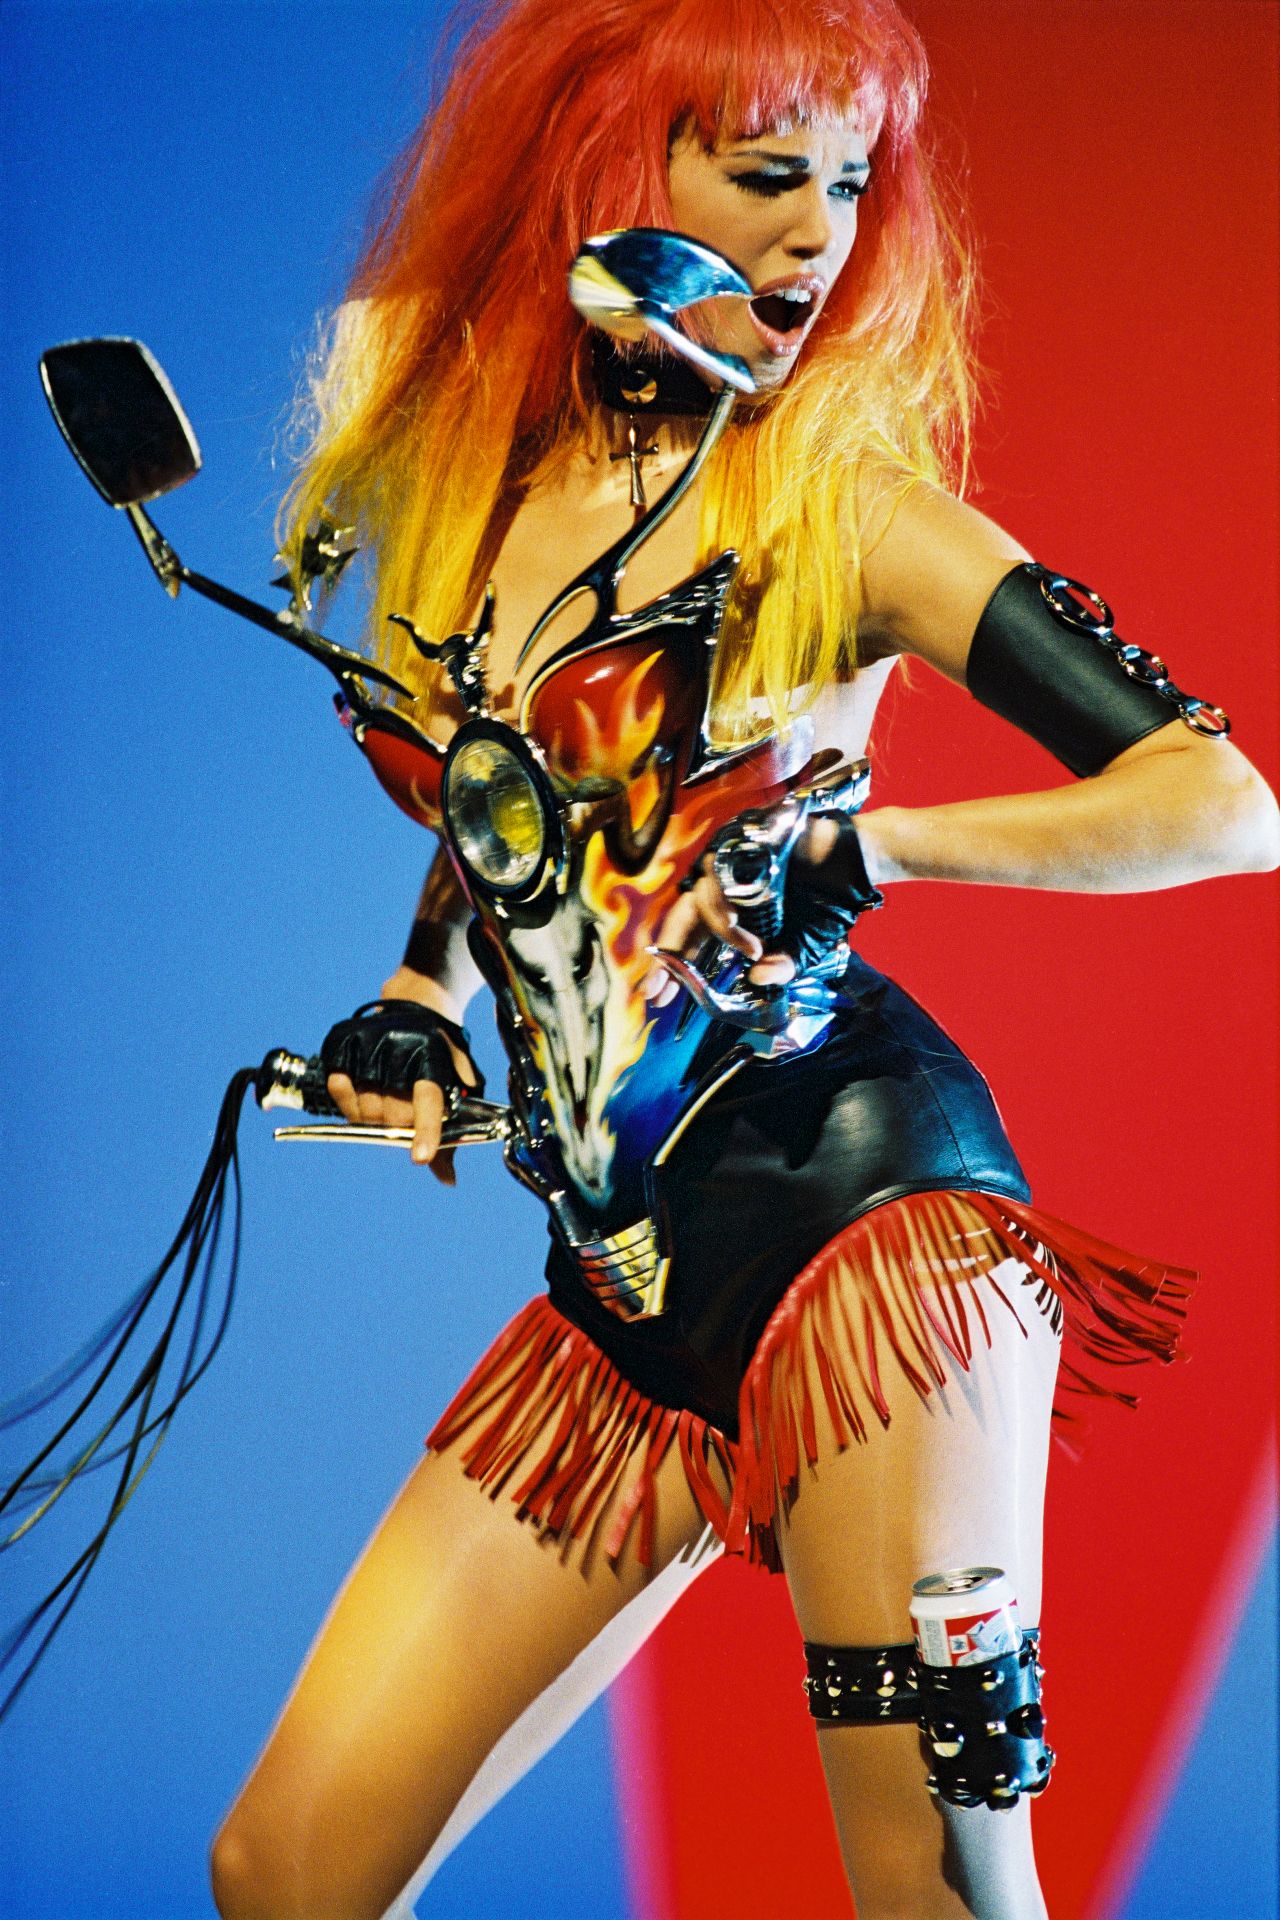 Model Emma Sjöberg during the shooting of the video for George Michael's "Too Funky," directed by Thierry Mugler, in 1992.